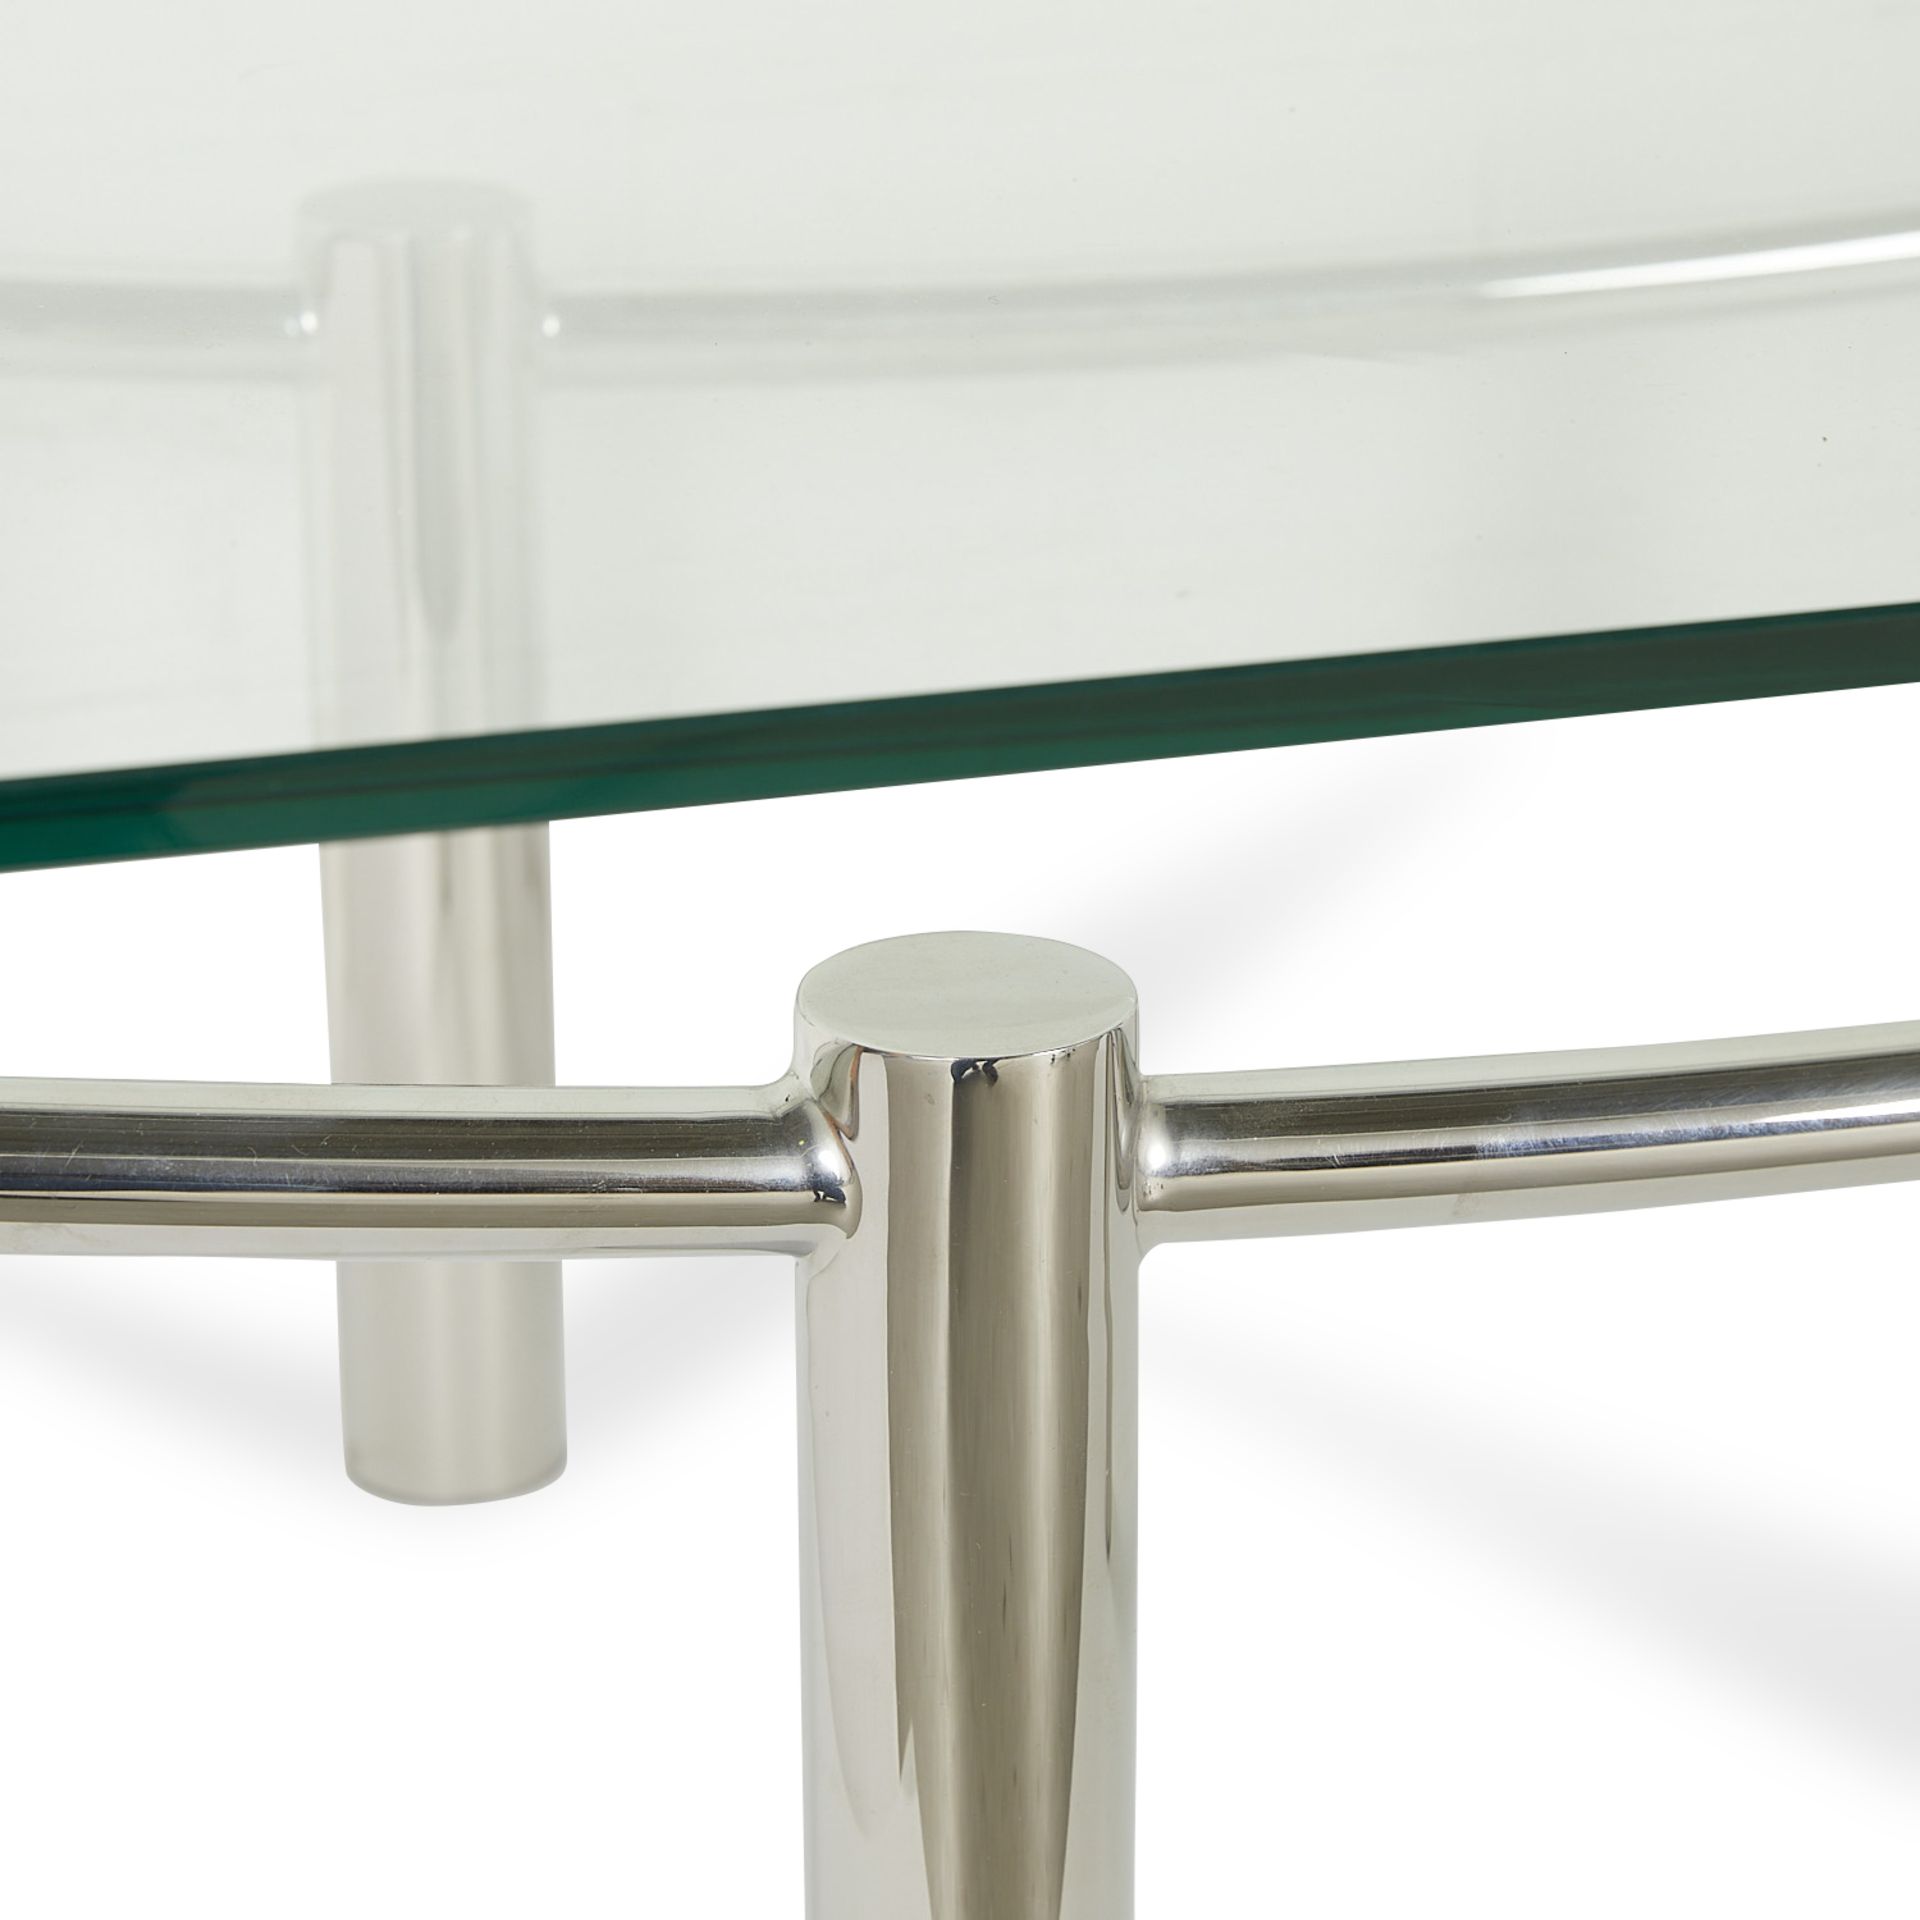 Brueton "Structures" Low Coffee Table w/ Glass Top - Image 11 of 12